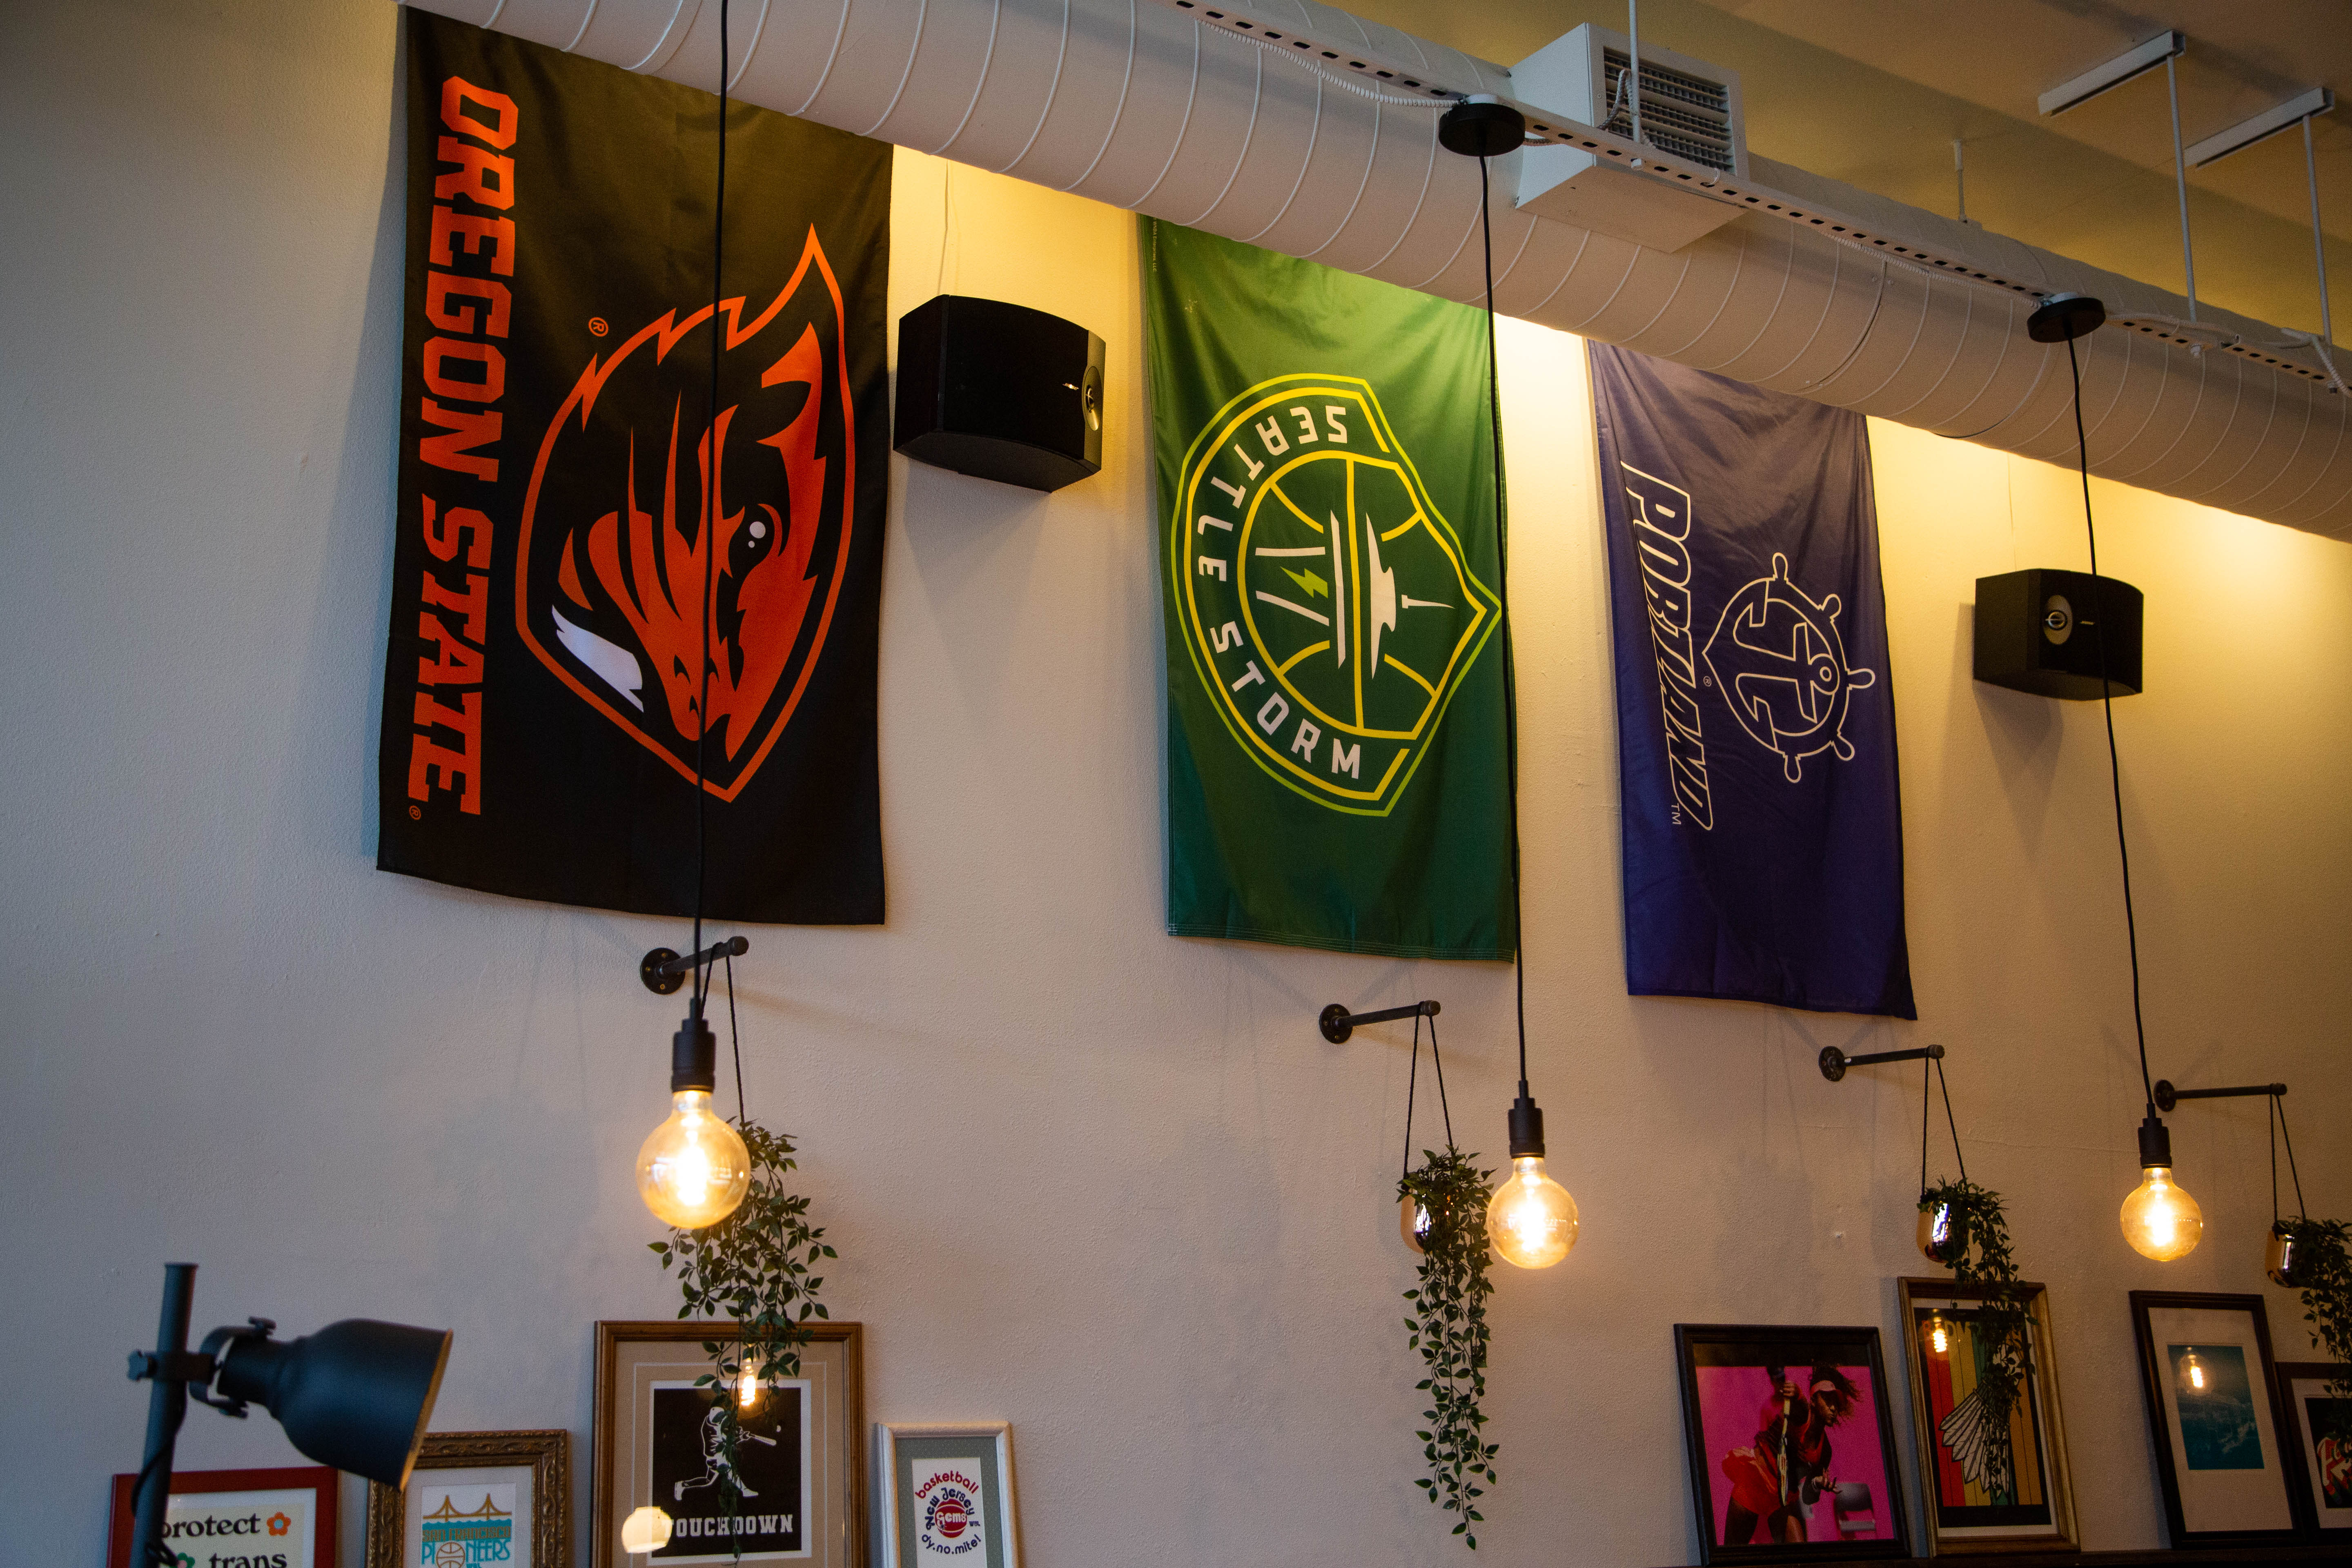 Banners for Oregon State, Seattle Storm and University of Portland on a wall.